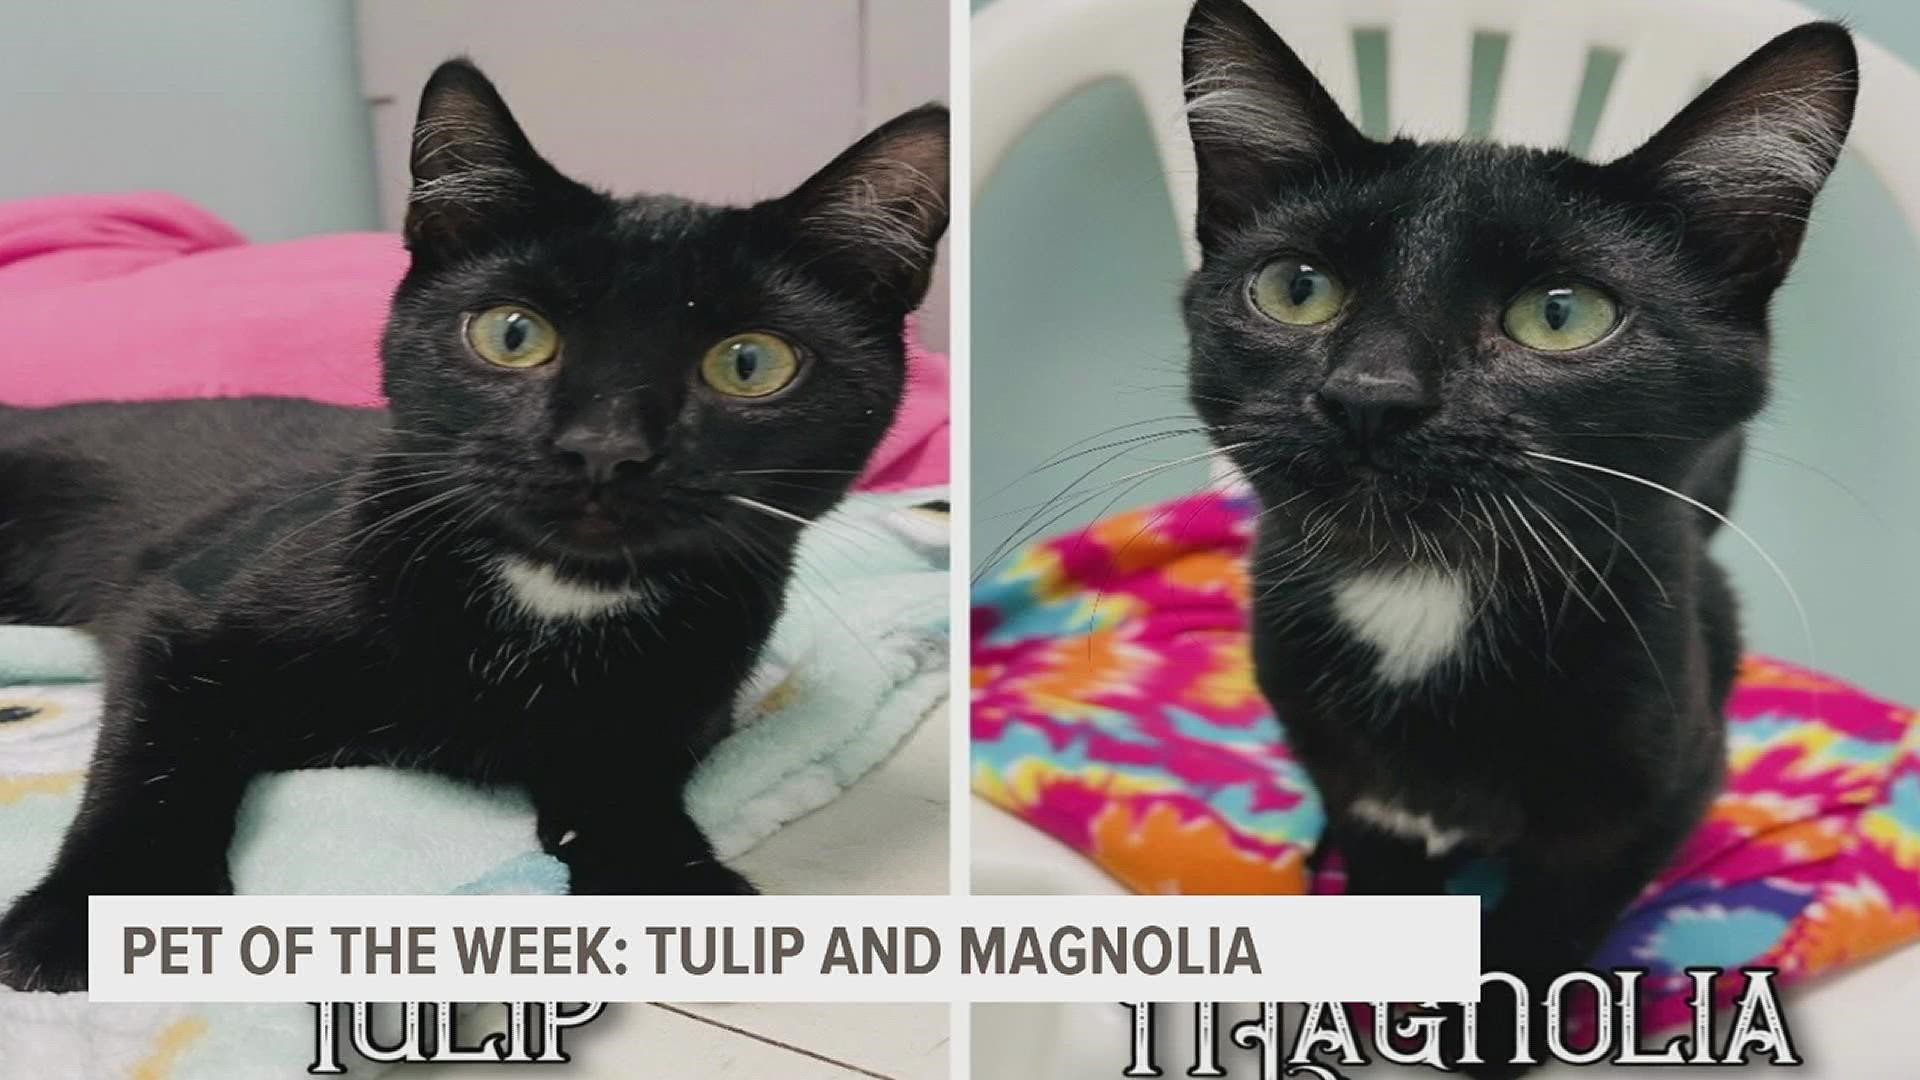 The pair are seeking a home where they can stay together. They enjoy playing with toys, cuddling together and soaking up all of your love and attention.